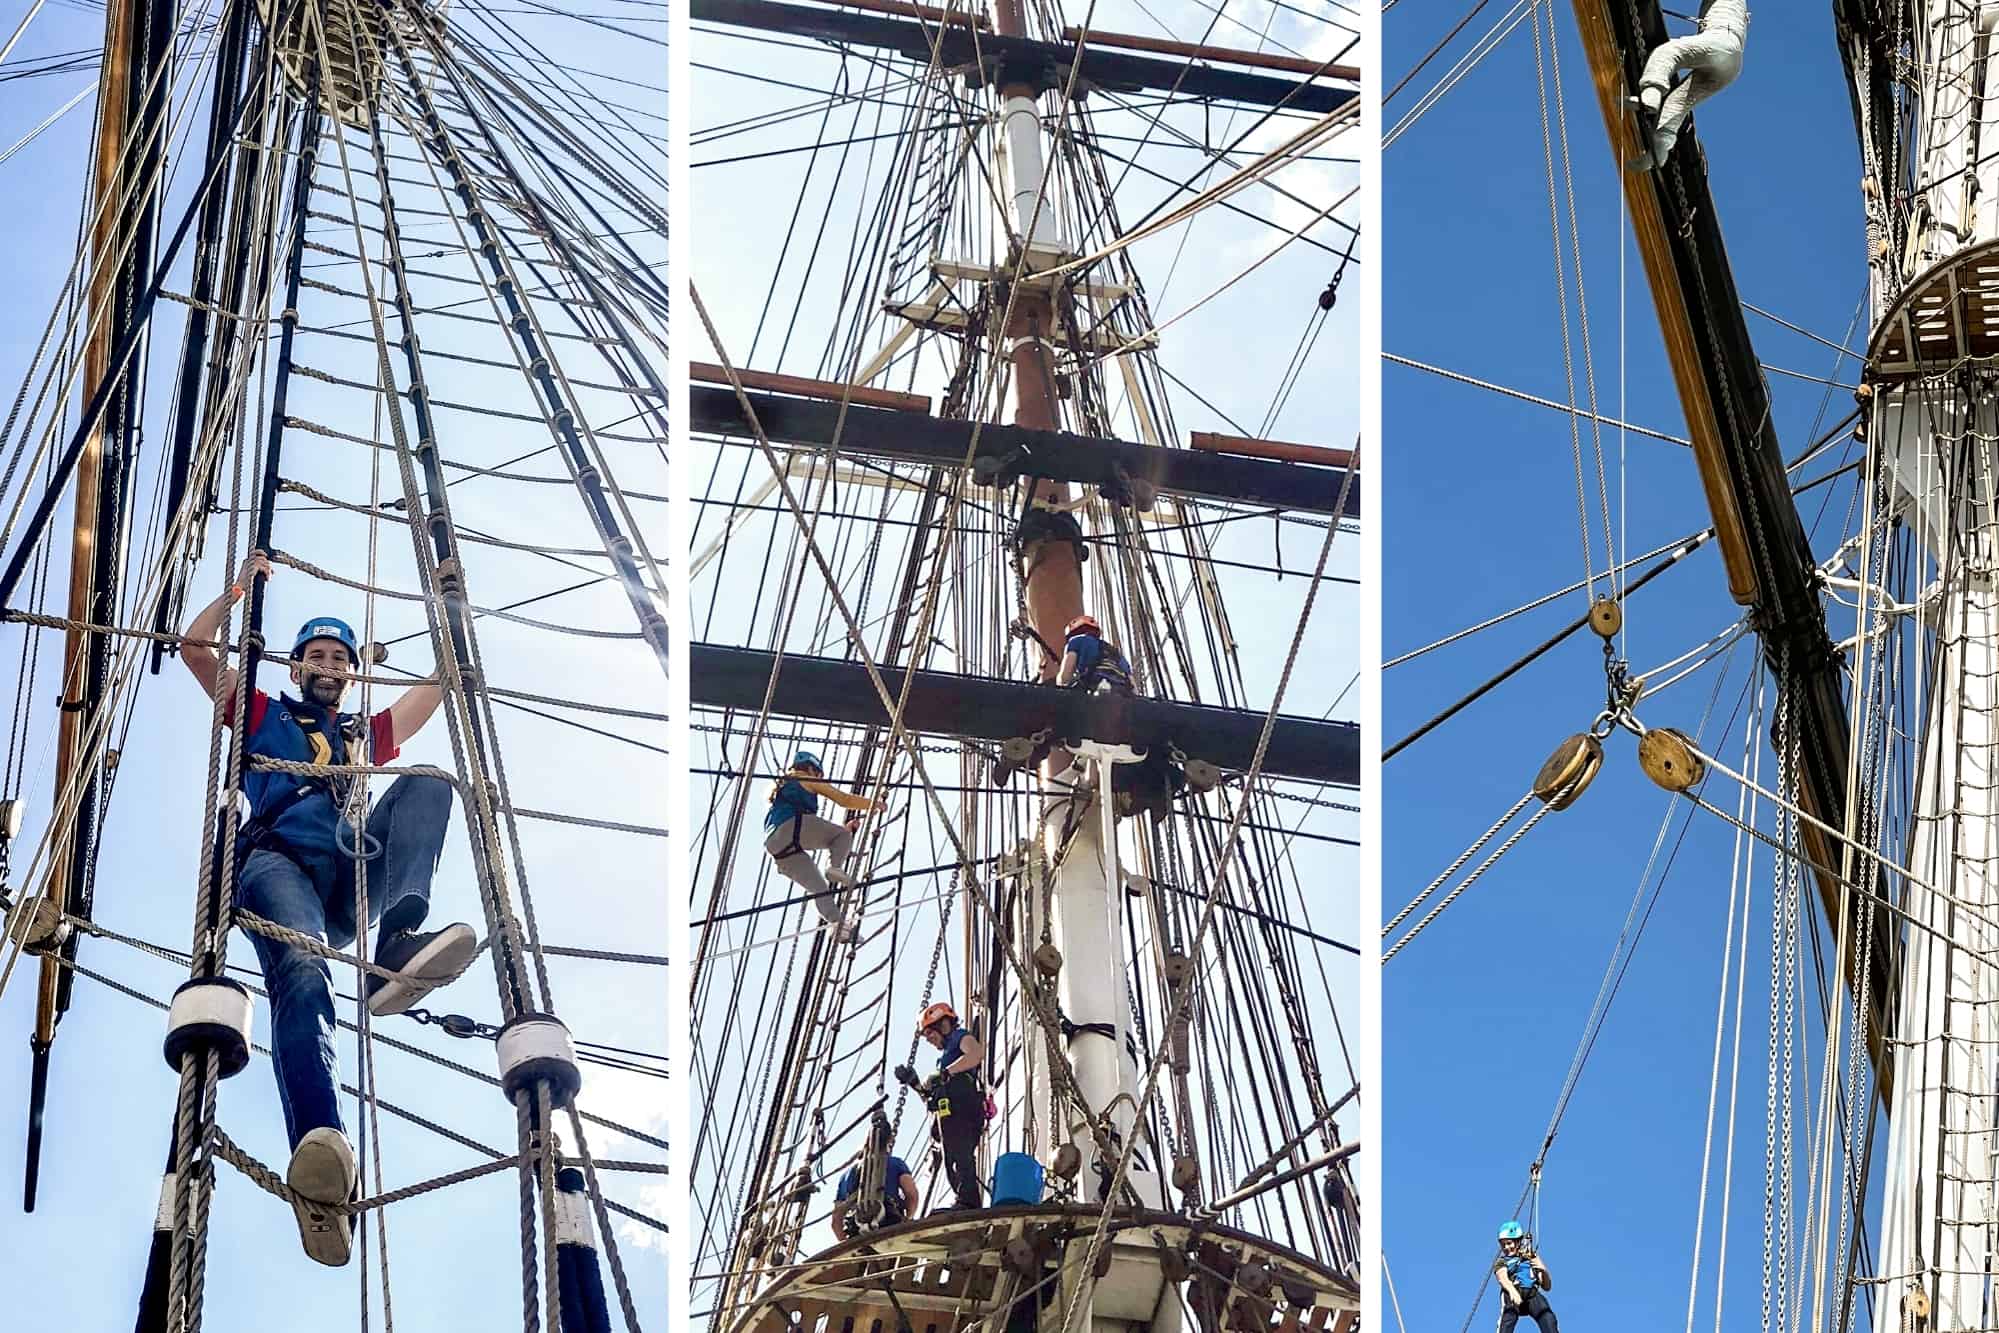 Left: A man climbs a rope ladder wearing a blue helmet and harness. Middle: A woman climb the rig lines on a mast of the Cutty Sark ship, surrounded by a safety team. Right: A woman on a ship mast zipline.